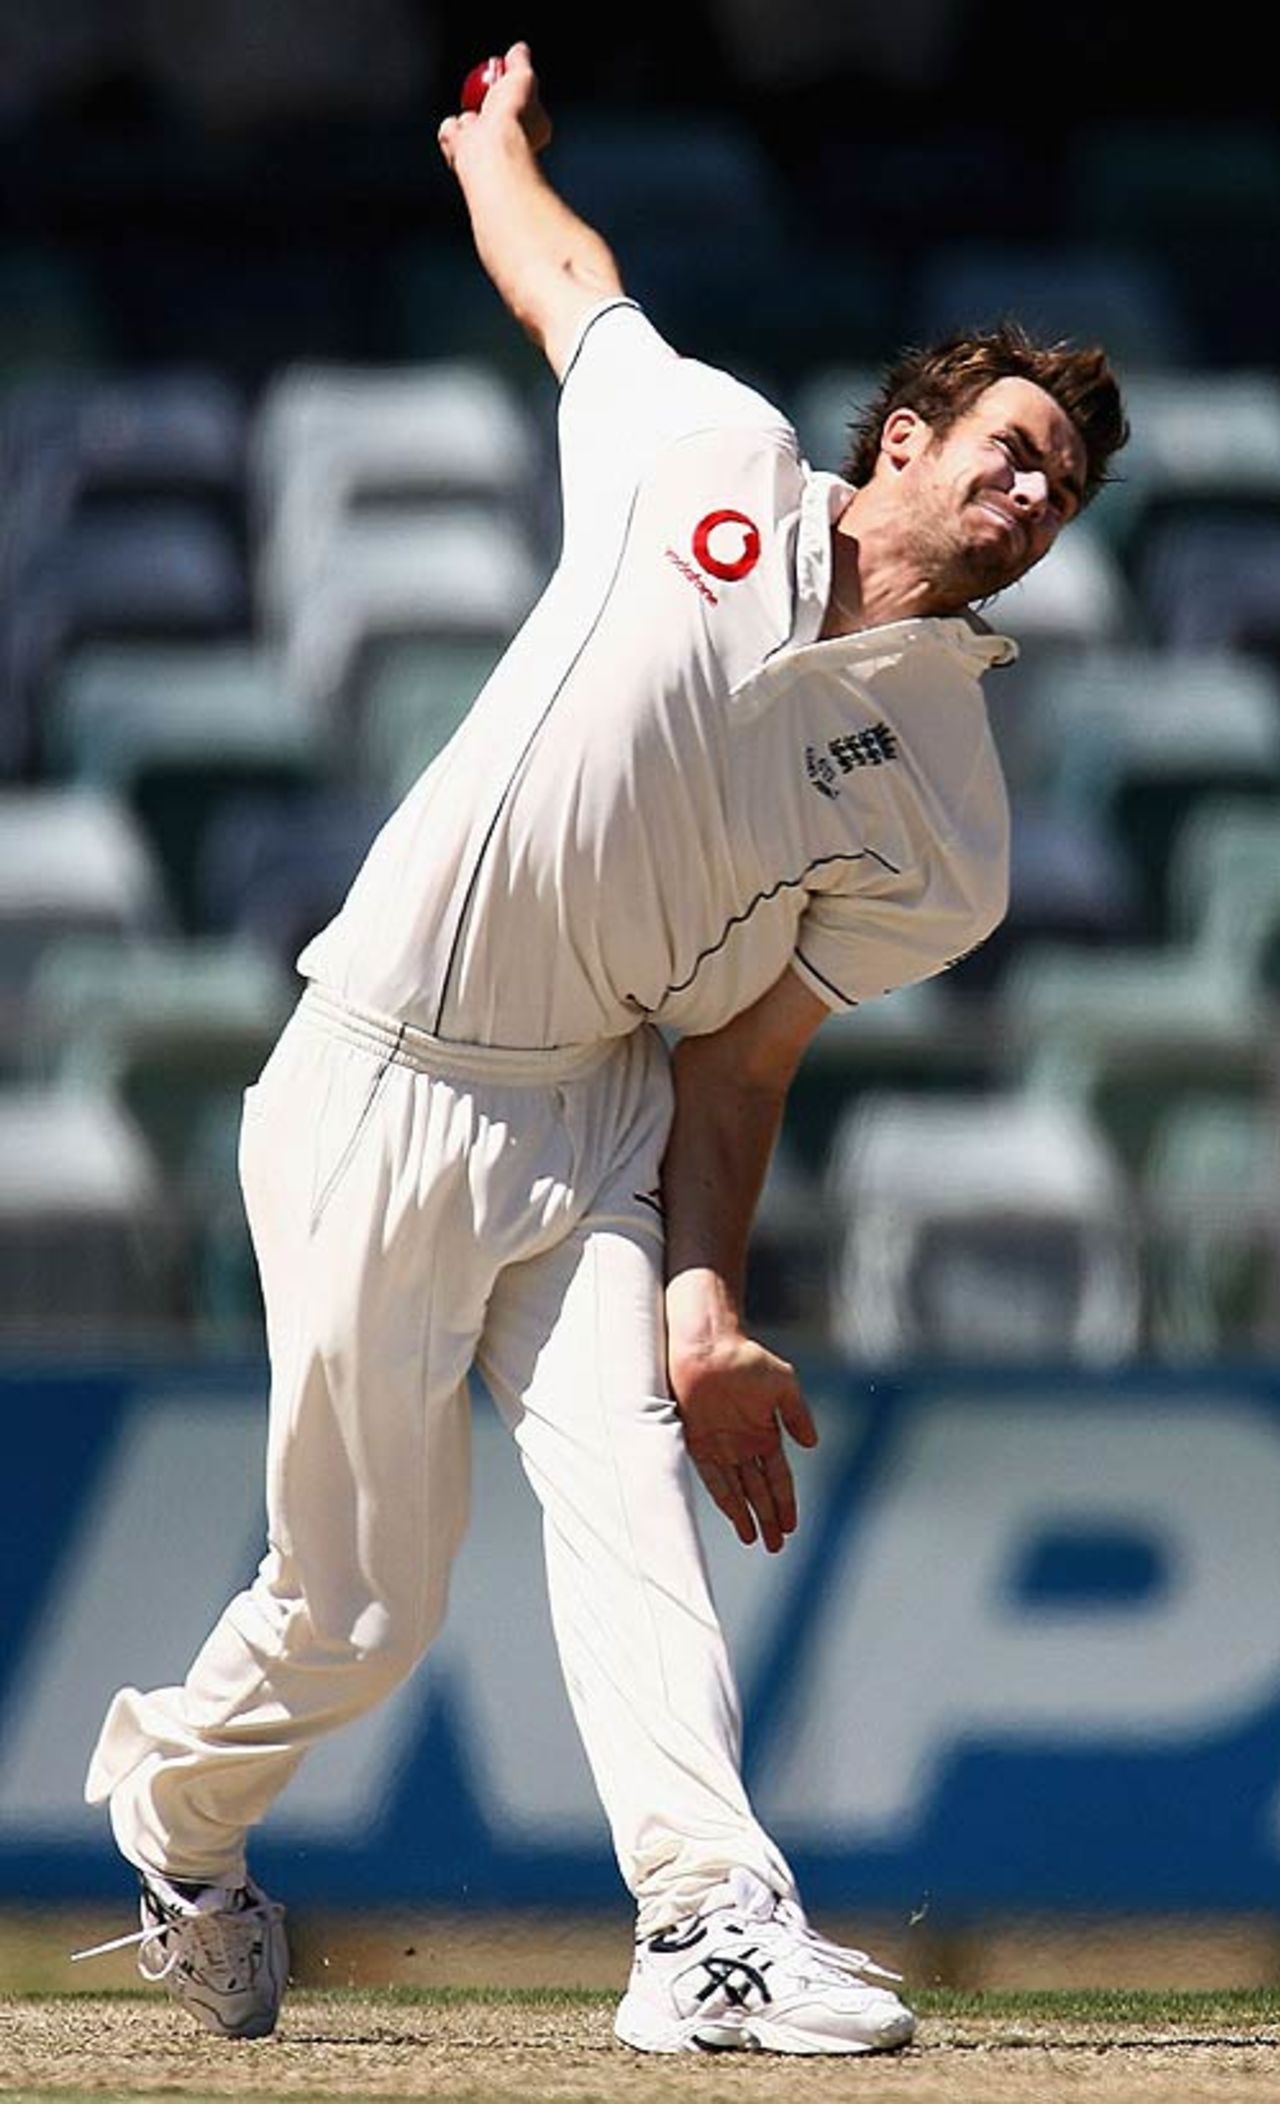 James Anderson in his delivery stride, Western Australia v England XI, Perth, December 9, 2006